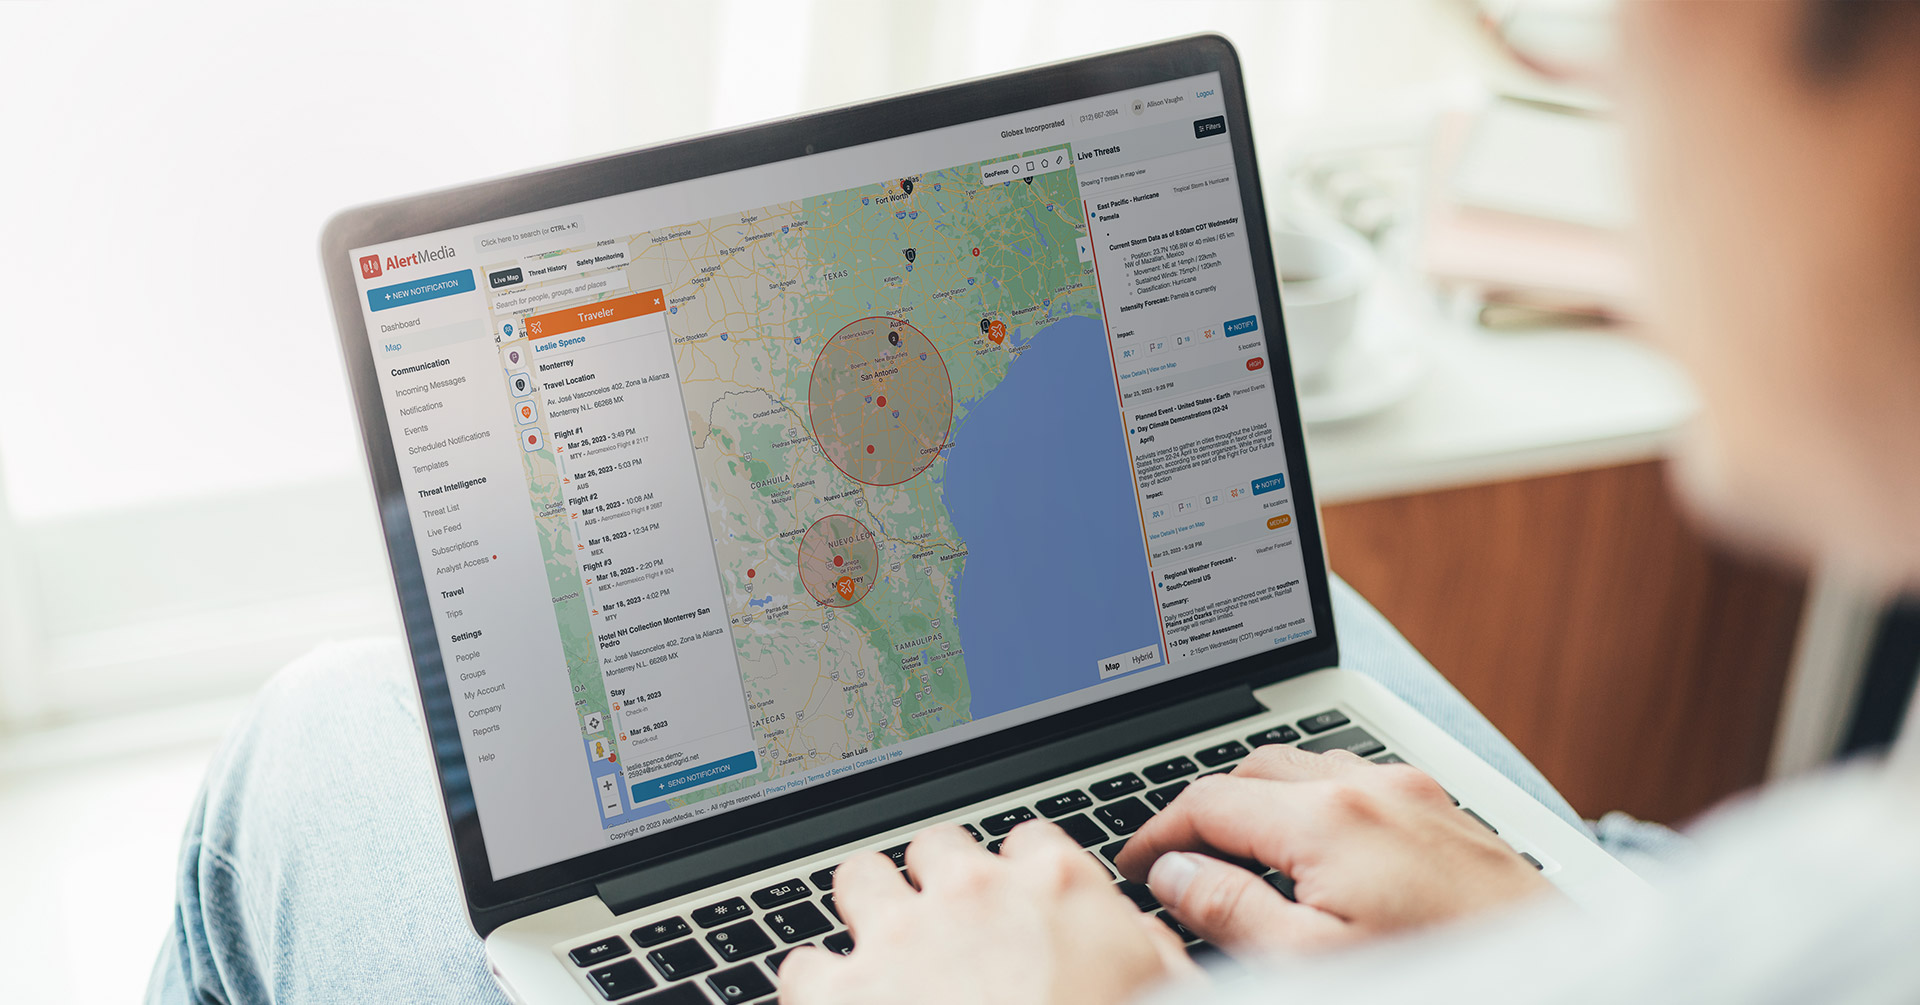 A person views threat details within a given radius on the Travel Risk Management live map on a laptop computer.